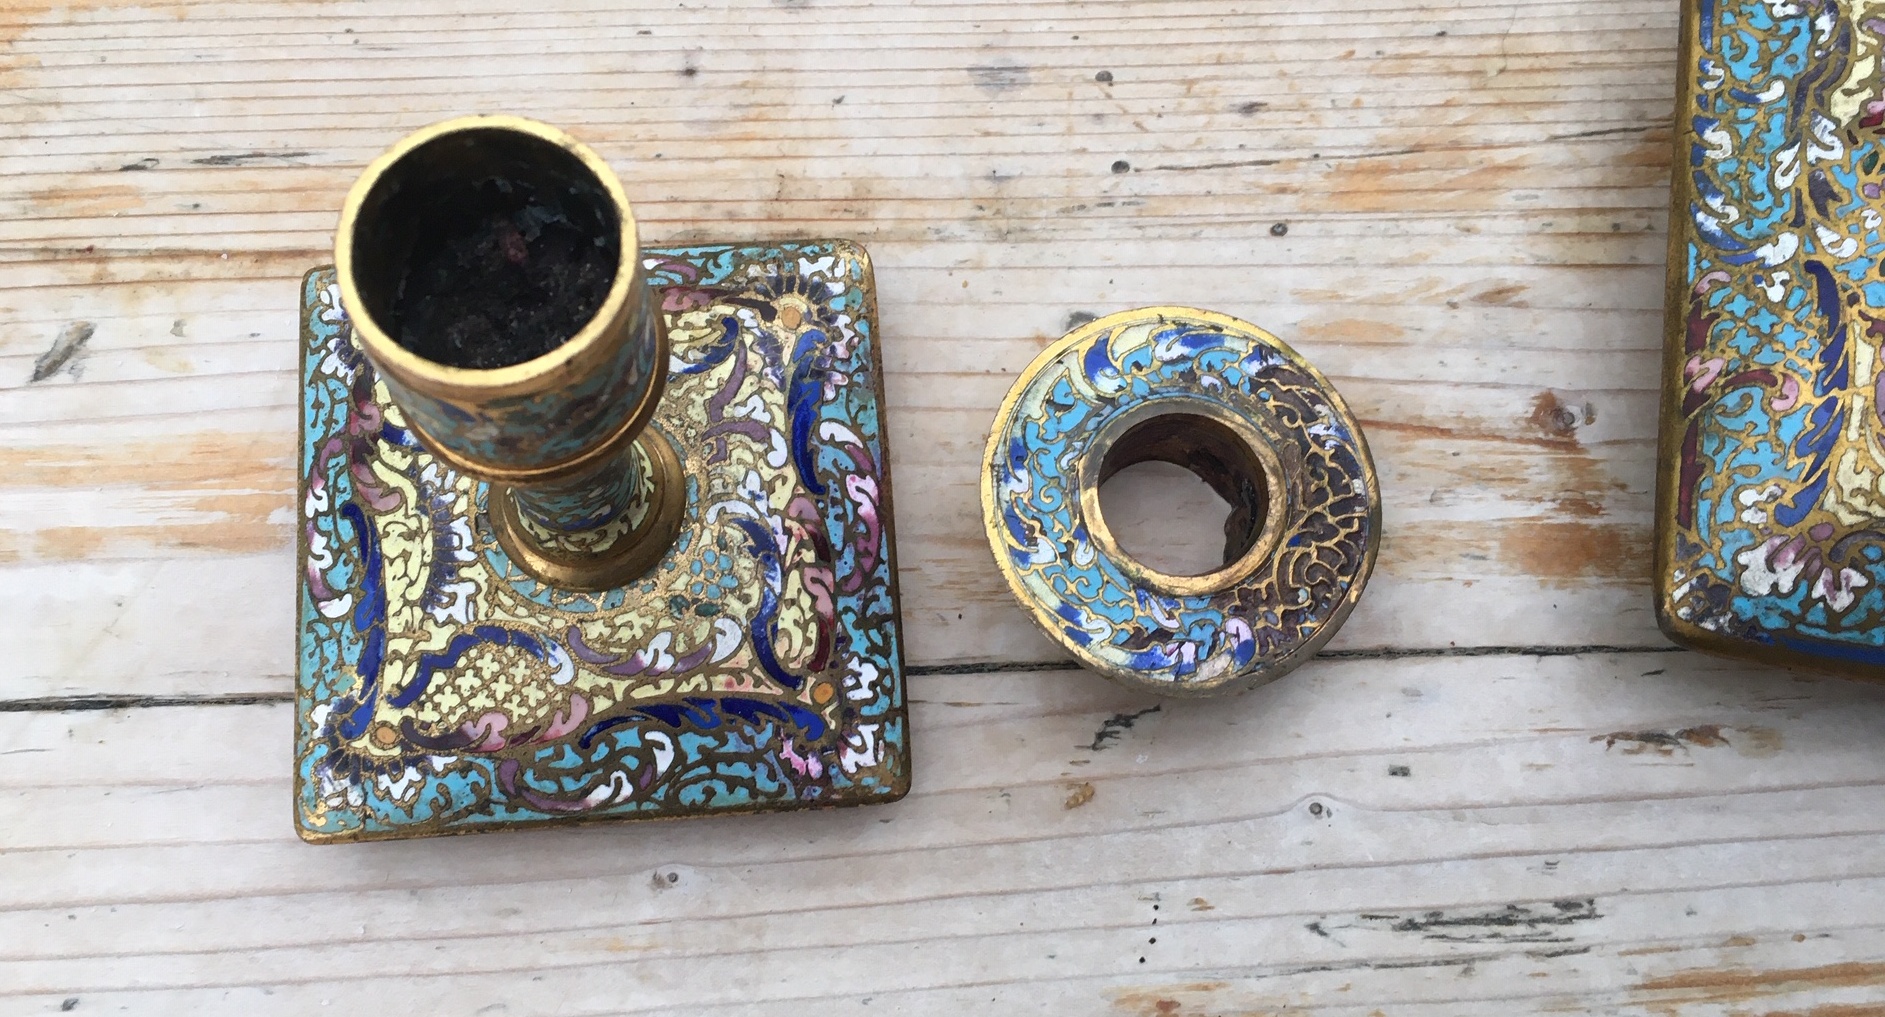 Antique/Vintage Lot of Desk Set of Brass and Cloisonne Inkwell and Candlesticks. - Image 5 of 12